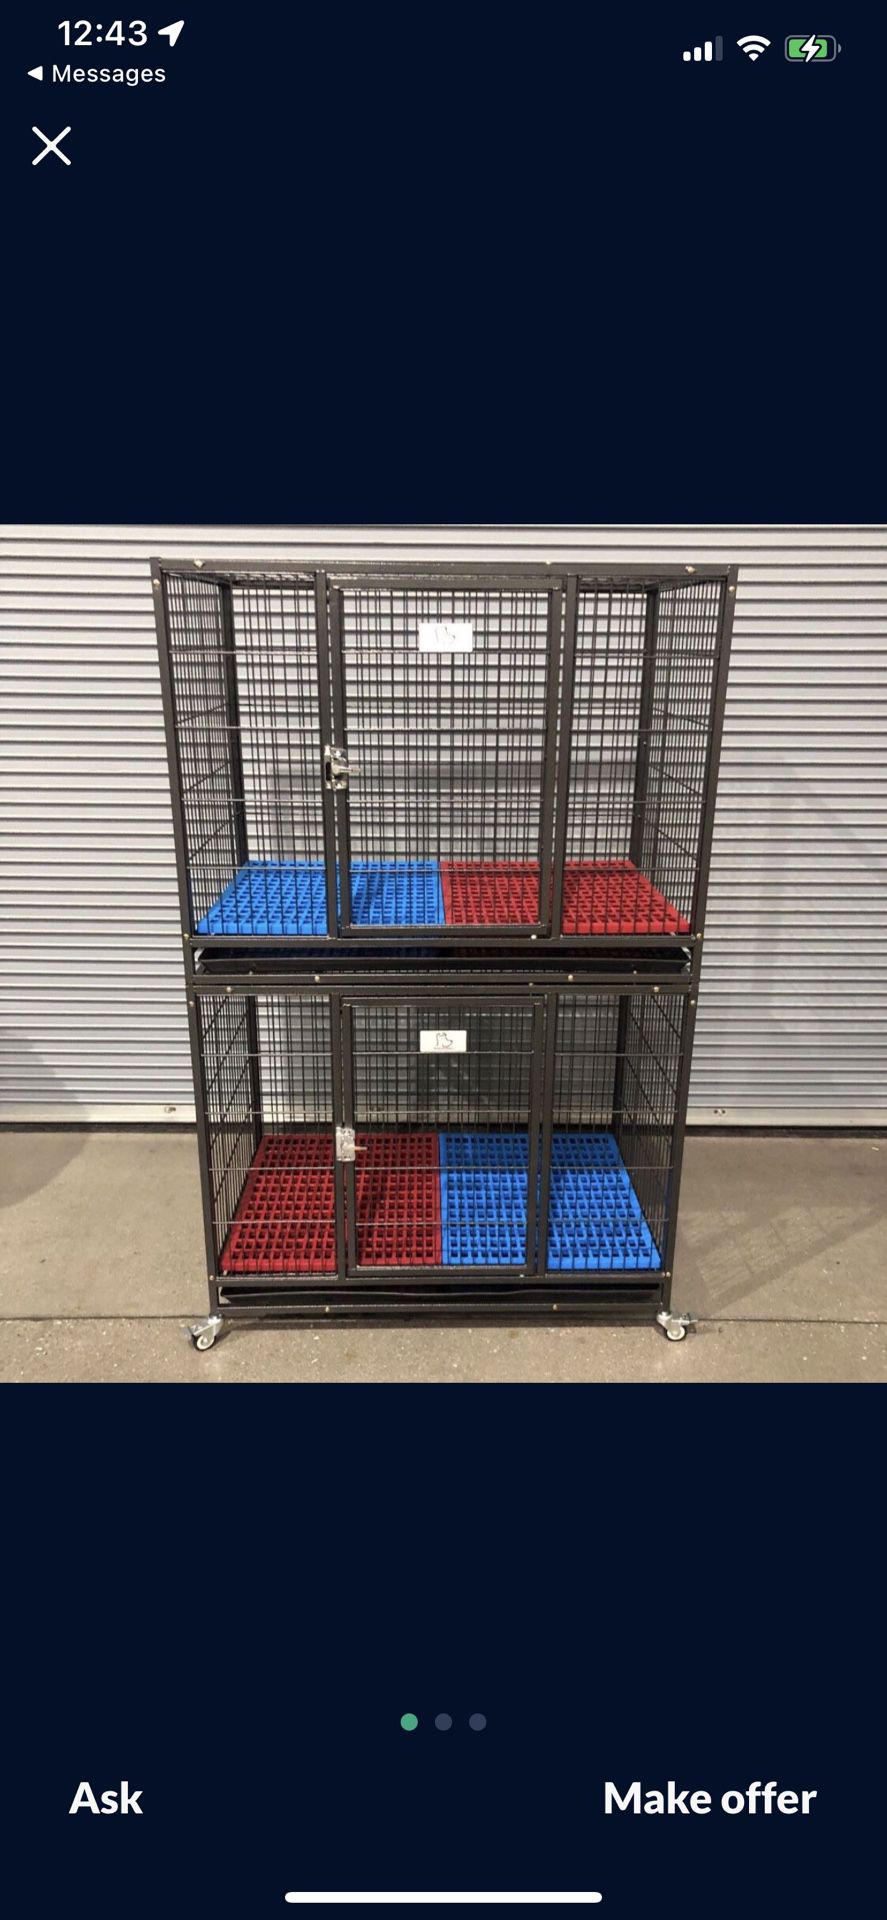 🦴Brandnew 2 Tier Level Kennel Crate Cage ❤️🐕 Comfy Plastic Floor🐶🐶Dimensions: 37”L X 23”W X 30”H 🇺🇸